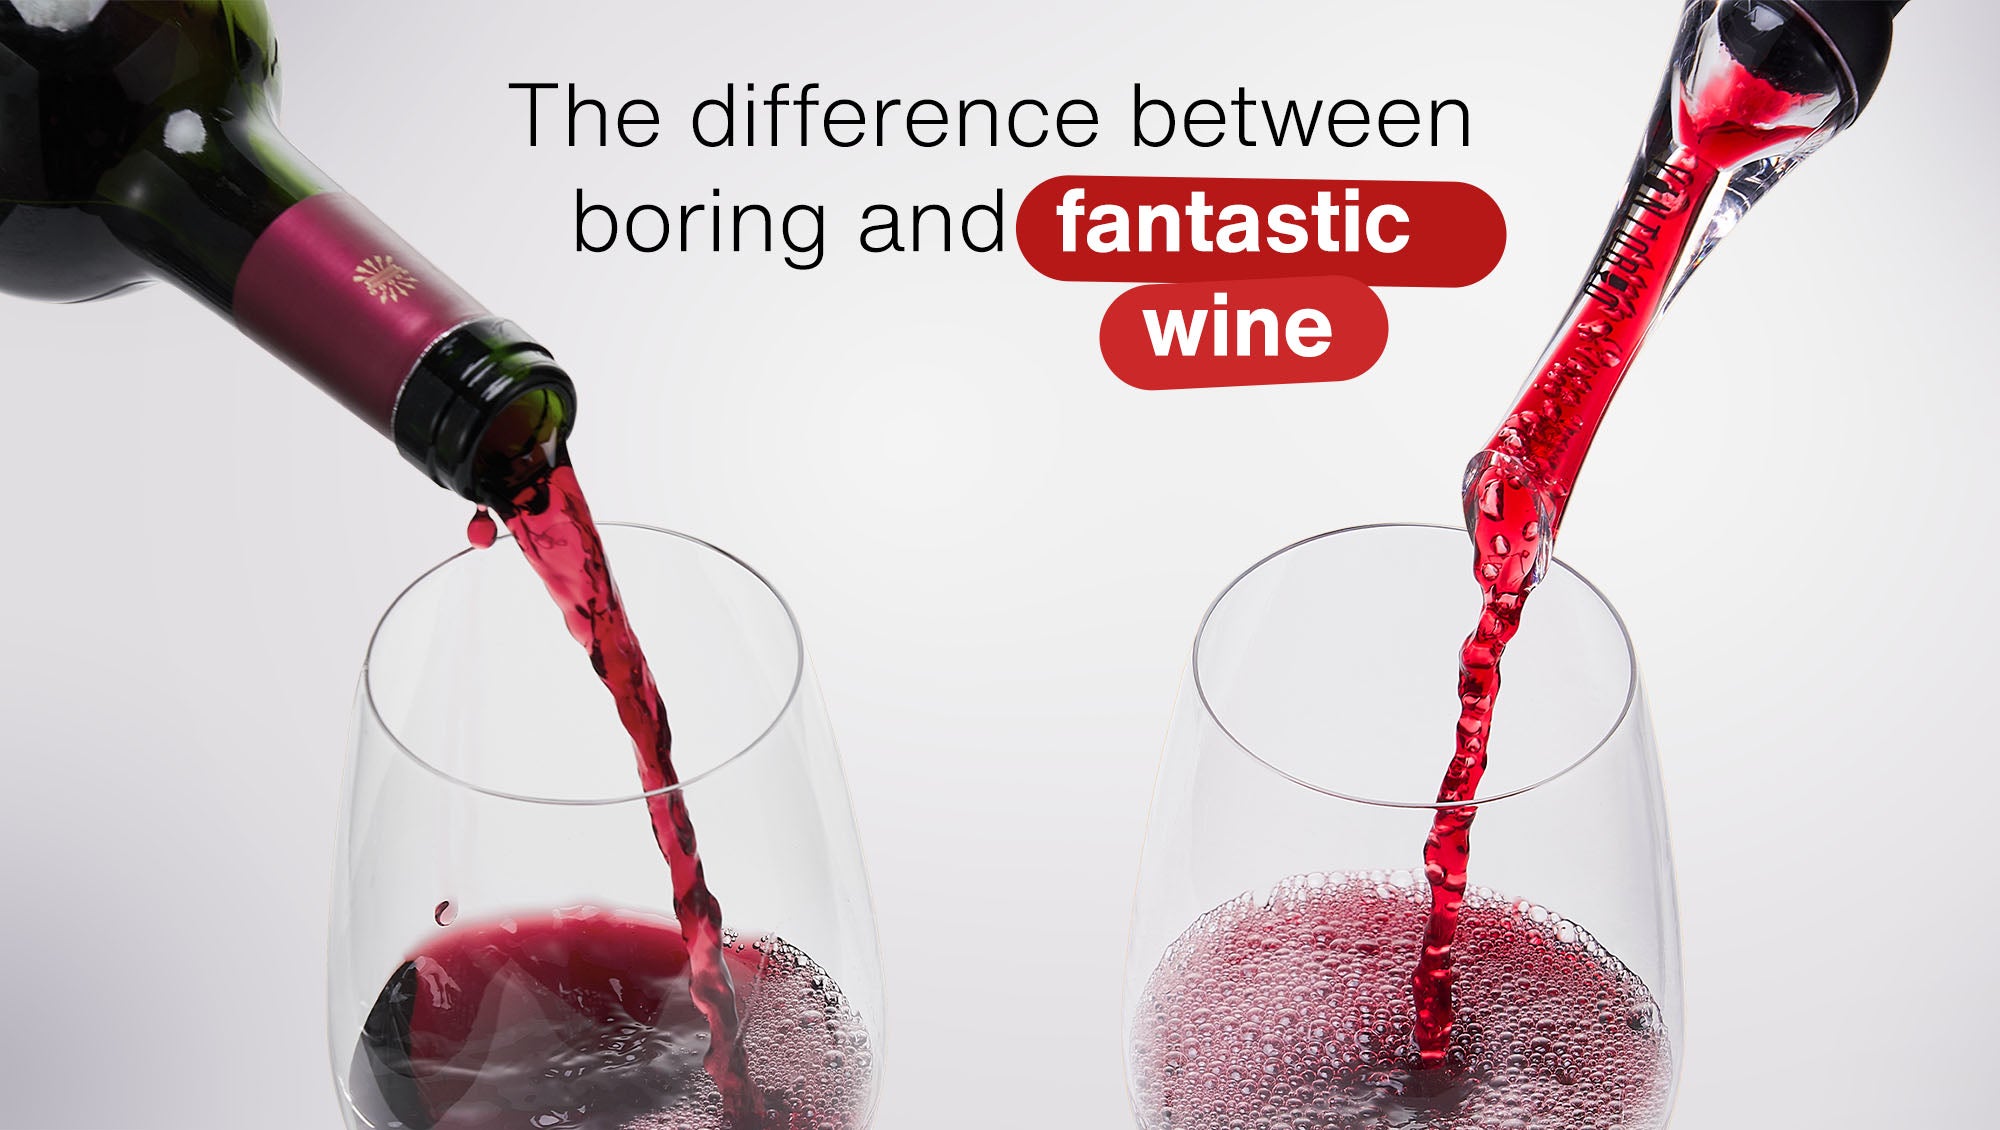 Why aerate wine? The difference between fantastic wine and a boring glass of wine